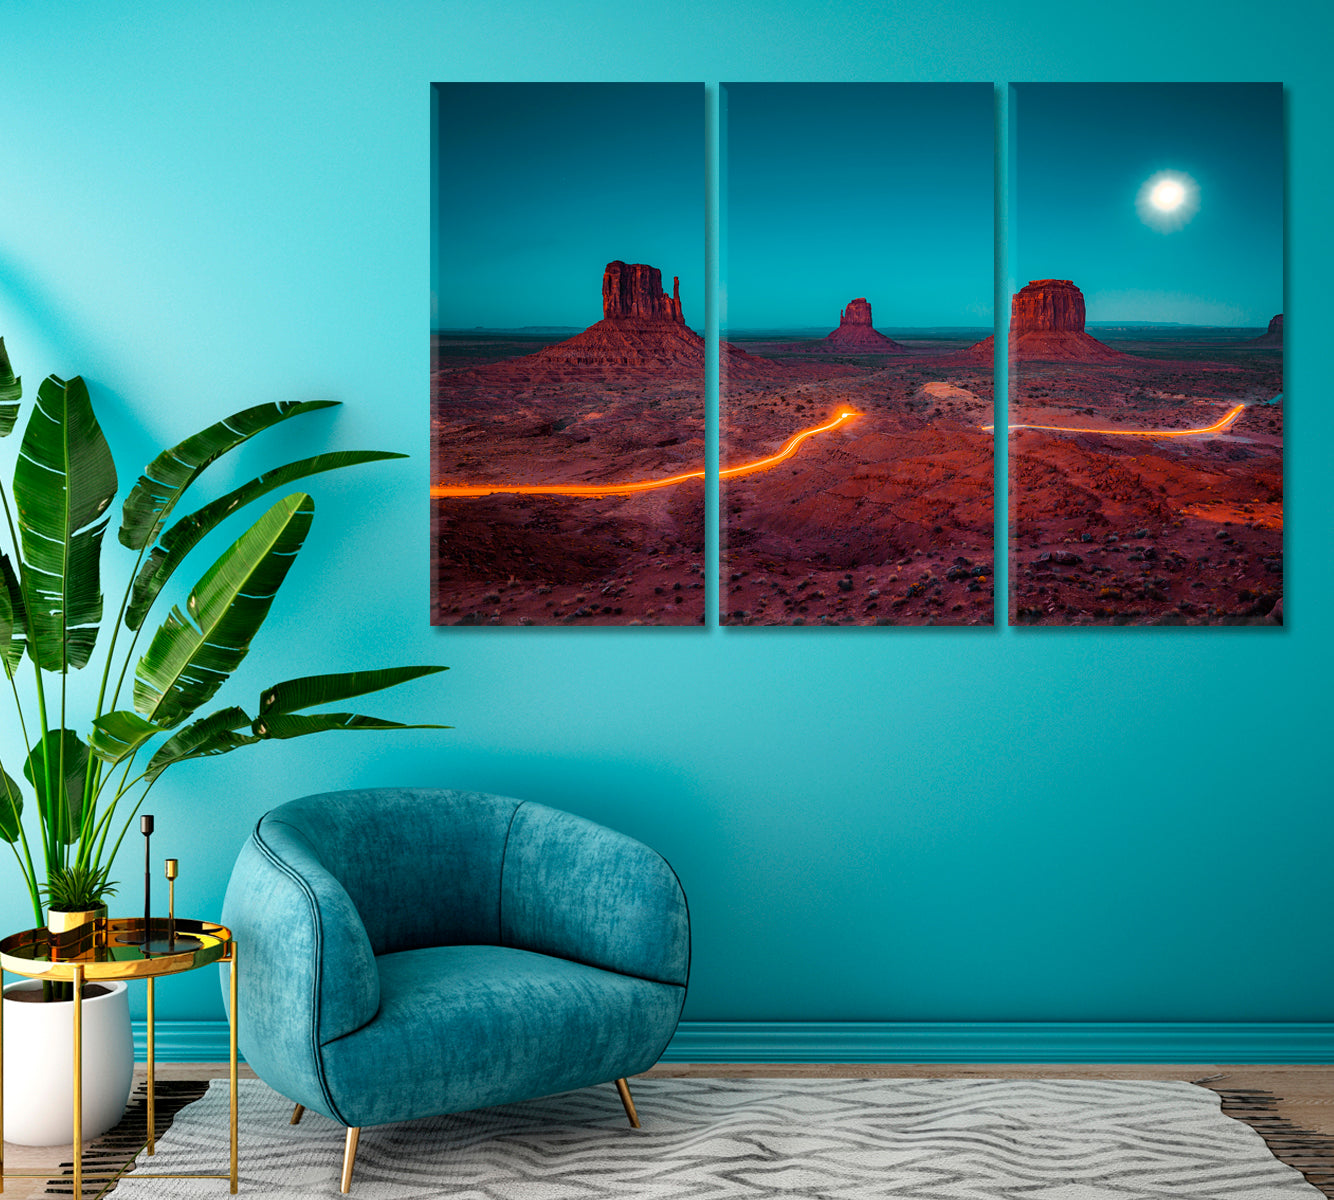 Monument Valley with Mittens and Merrick Butte Arizona USA Canvas Print ArtLexy   